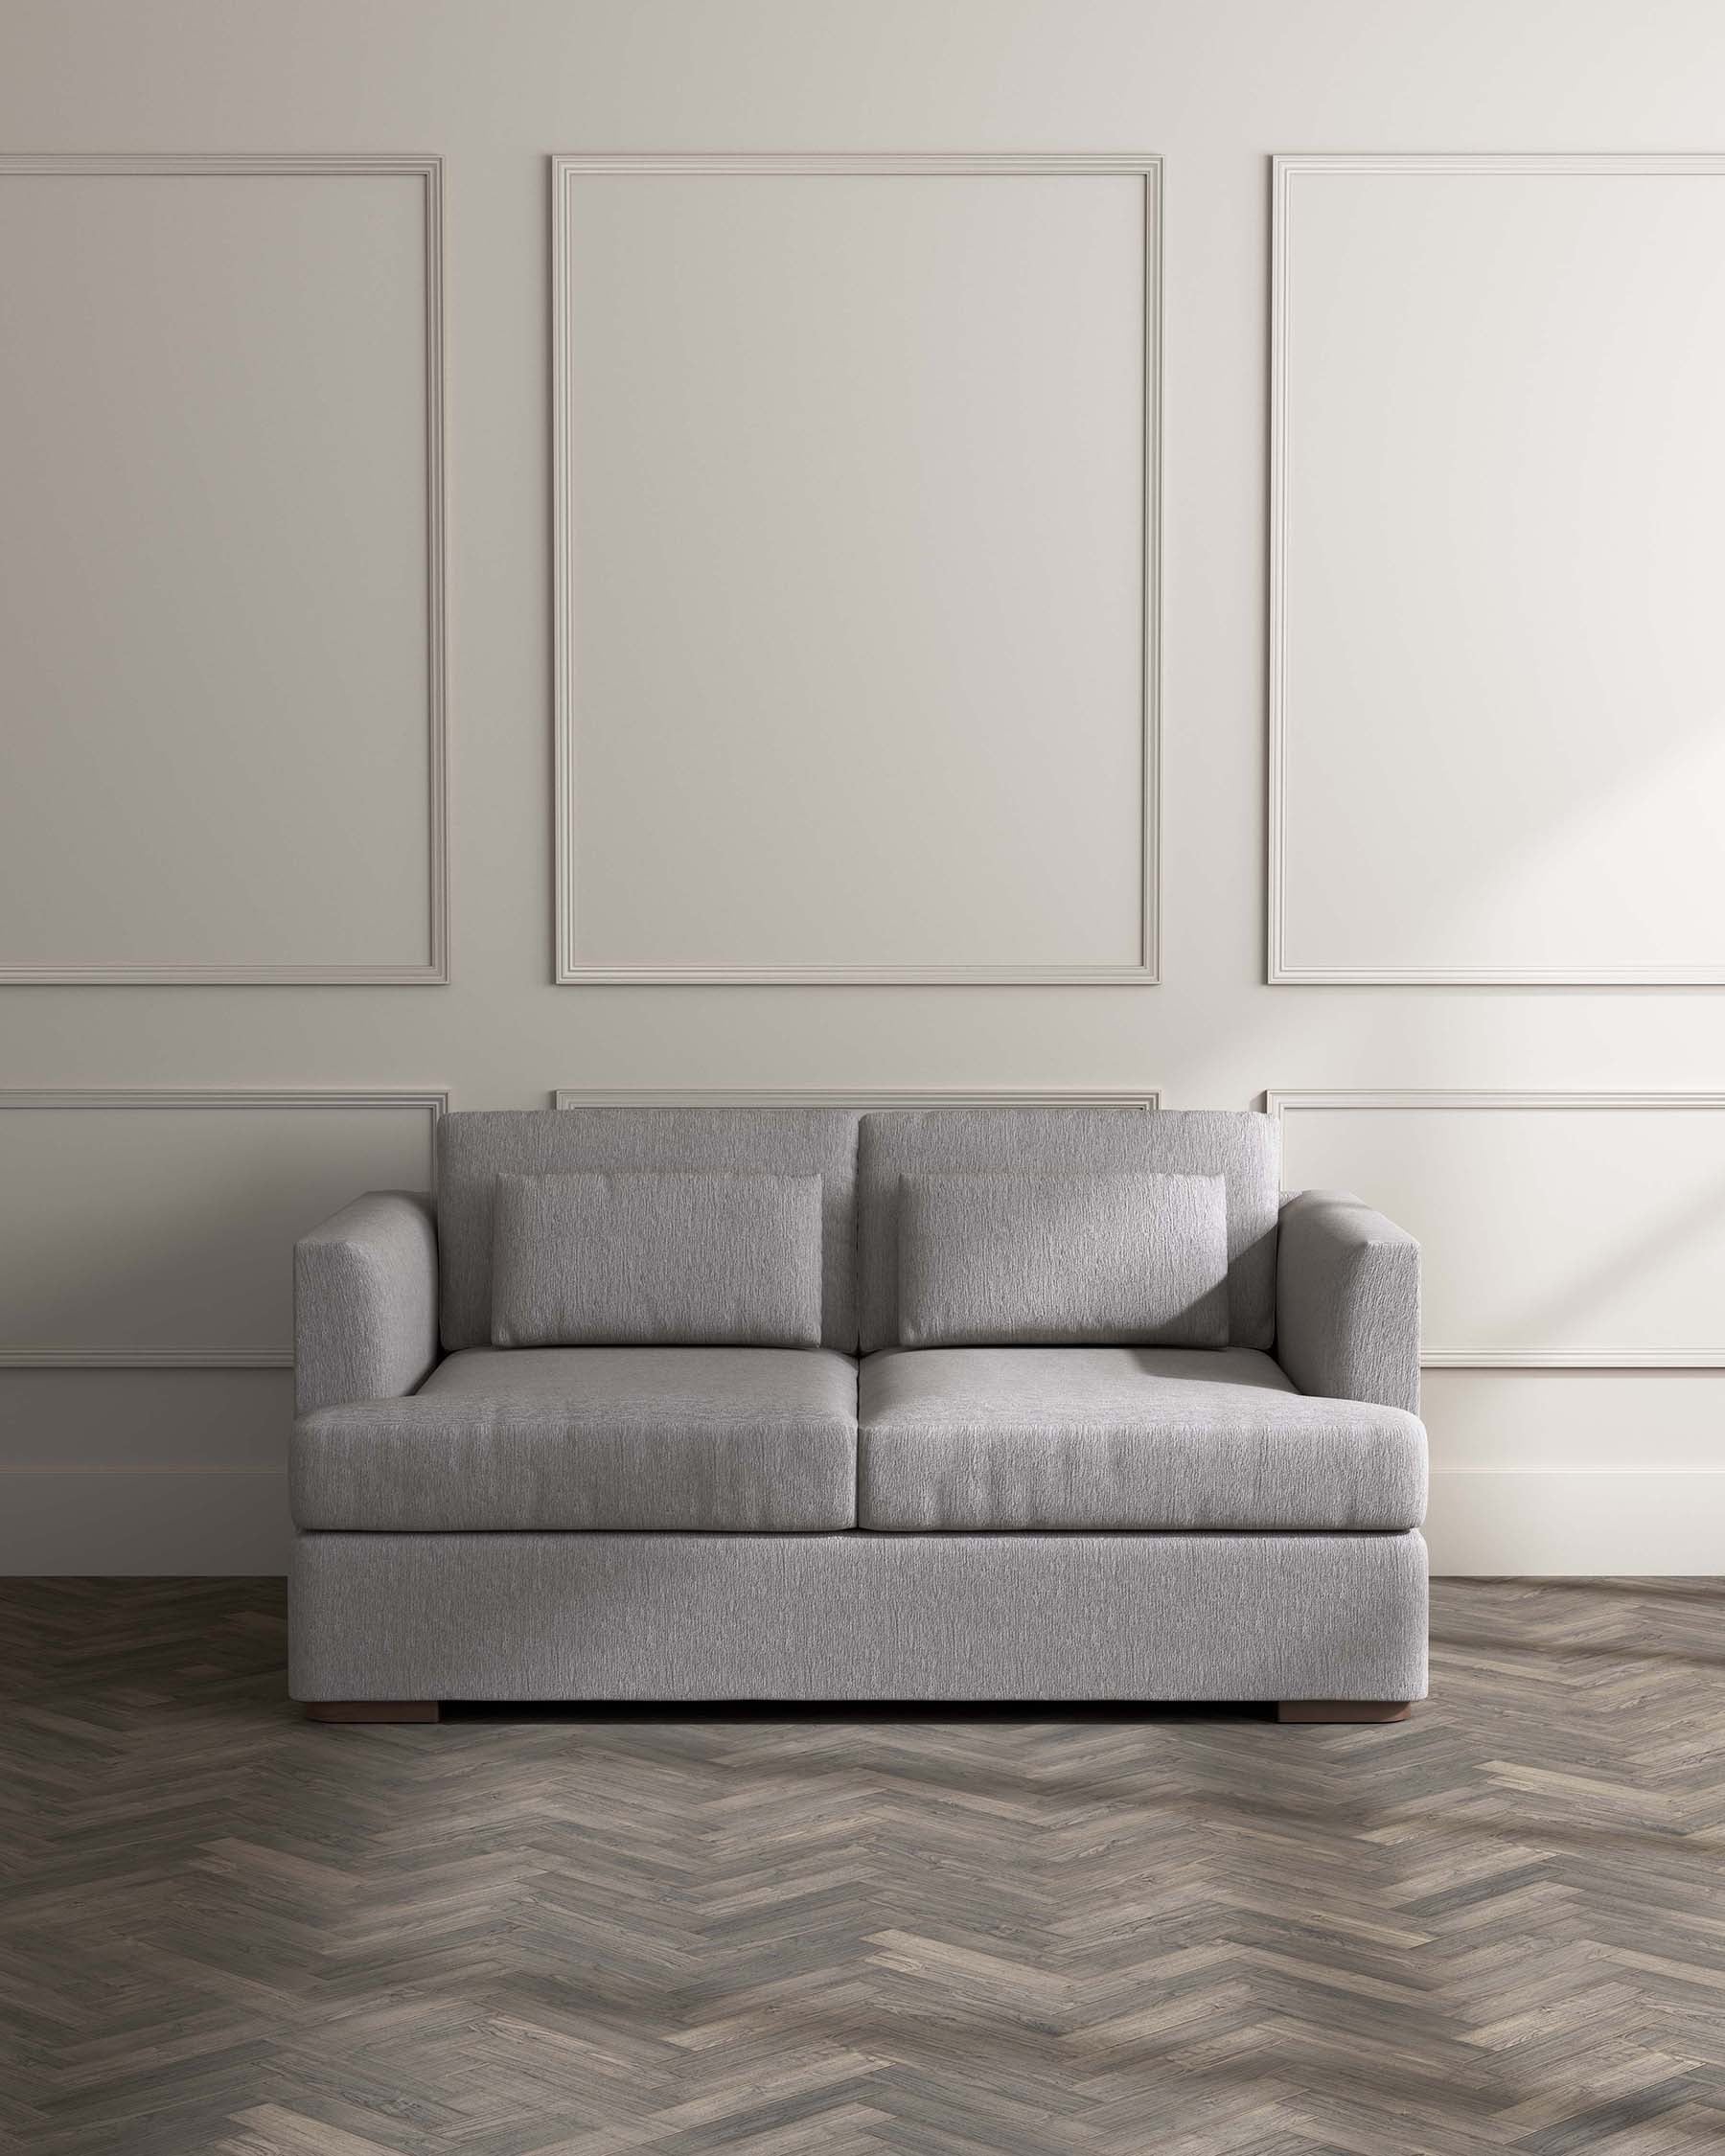 Ashby 2 Seater Sofa Mid Grey Weave With Grey Wood Legs